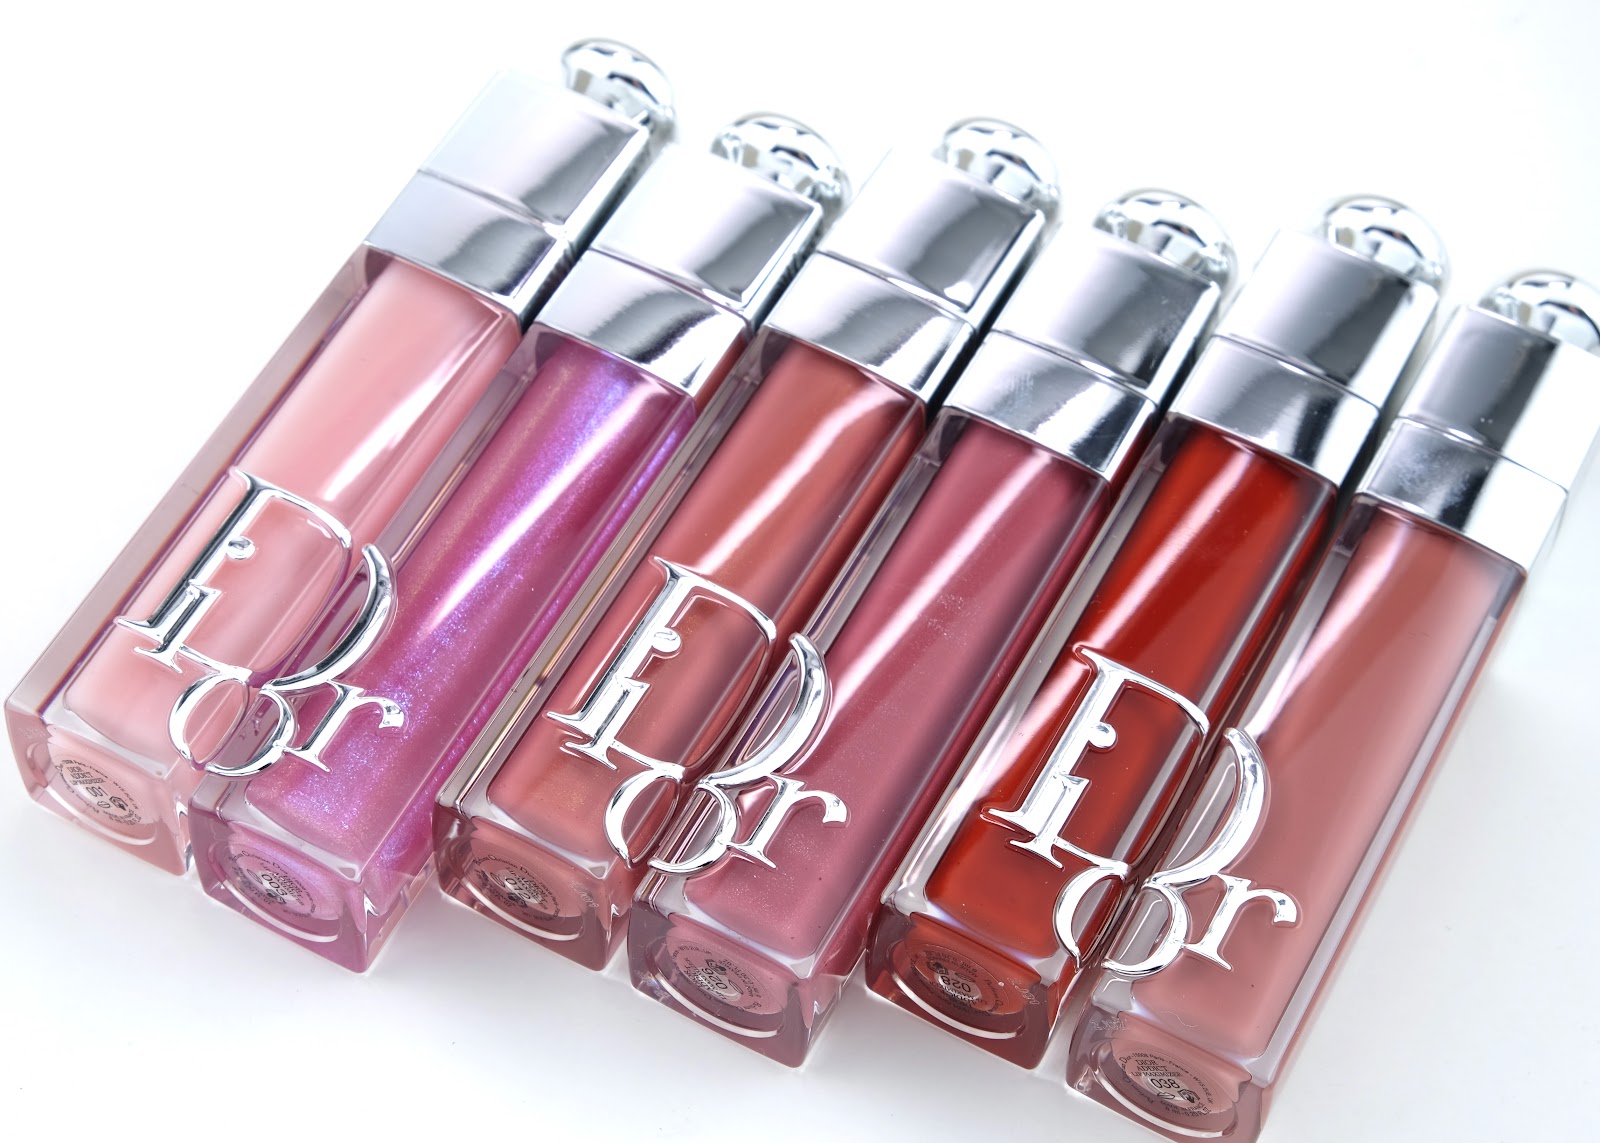 Dior | Dior Addict Lip Maximizer Lip Plumping Gloss: Review and Swatches